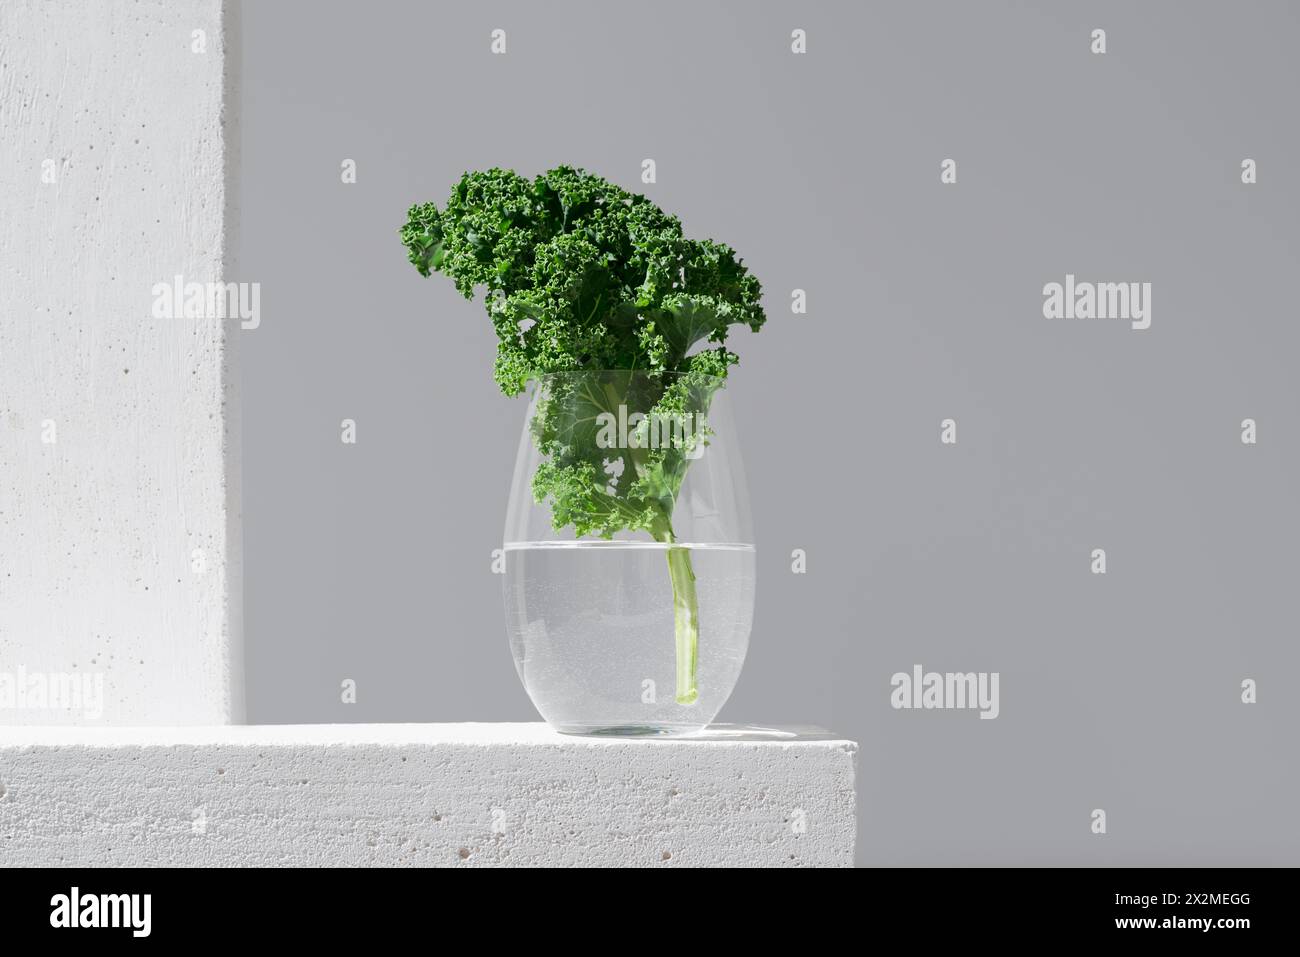 Fresh green kale leaves presented in a transparent glass filled with water, set against a minimalistic grey and white backdrop Stock Photo